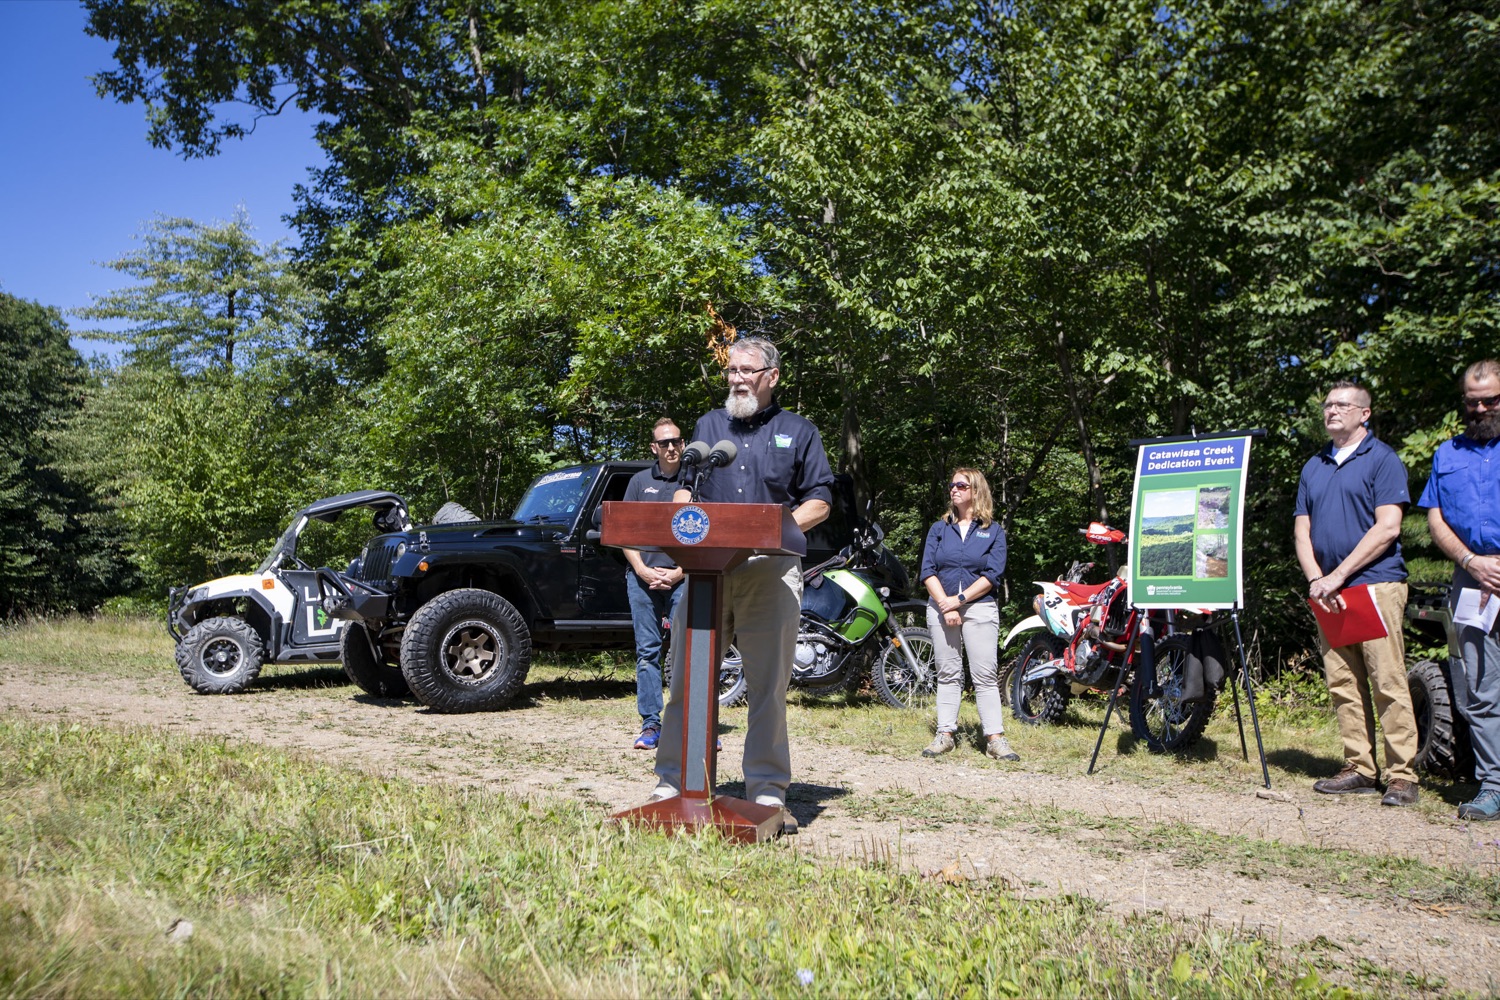 DCNR Deputy Secretary John Norbeck discusses the acquisition of a 5,600-acre tract of land that will be developed into a new motorized recreation area, in McAdoo, PA on August 12, 2022.<br><a href="https://filesource.amperwave.net/commonwealthofpa/photo/22090_dcnr_RecreationArea_10.jpg" target="_blank">⇣ Download Photo</a>